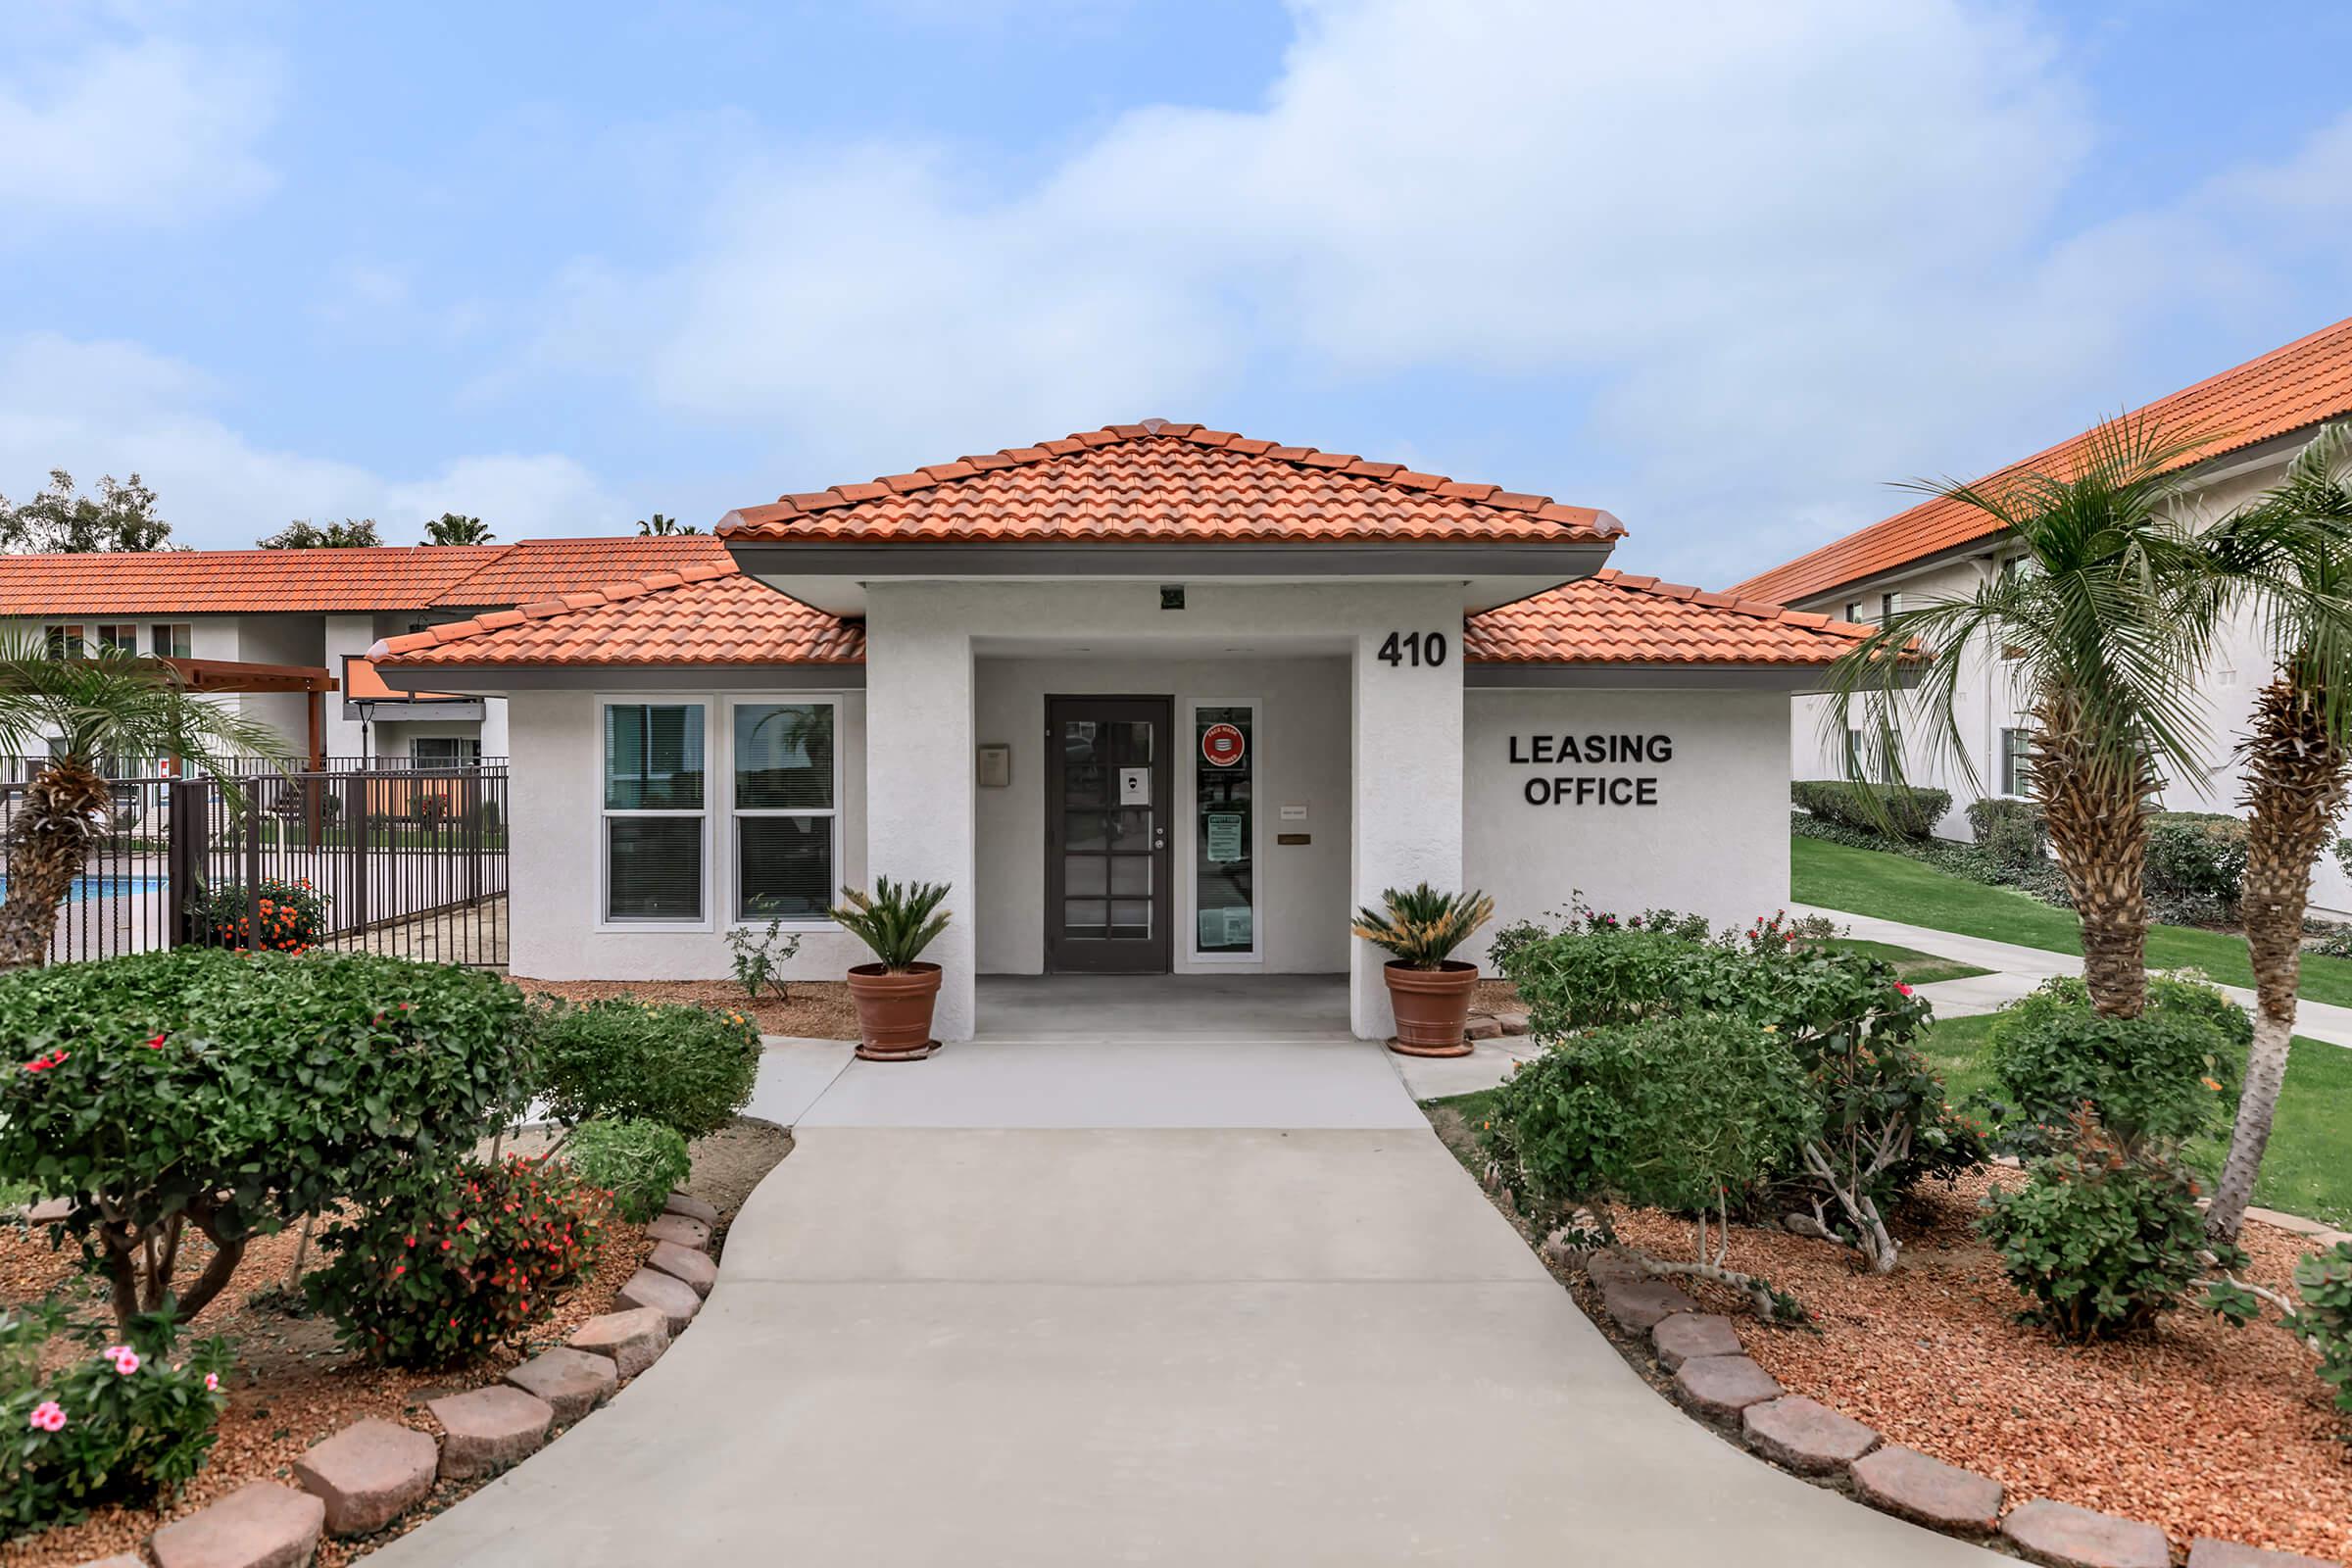 Pacific Palms leasing office